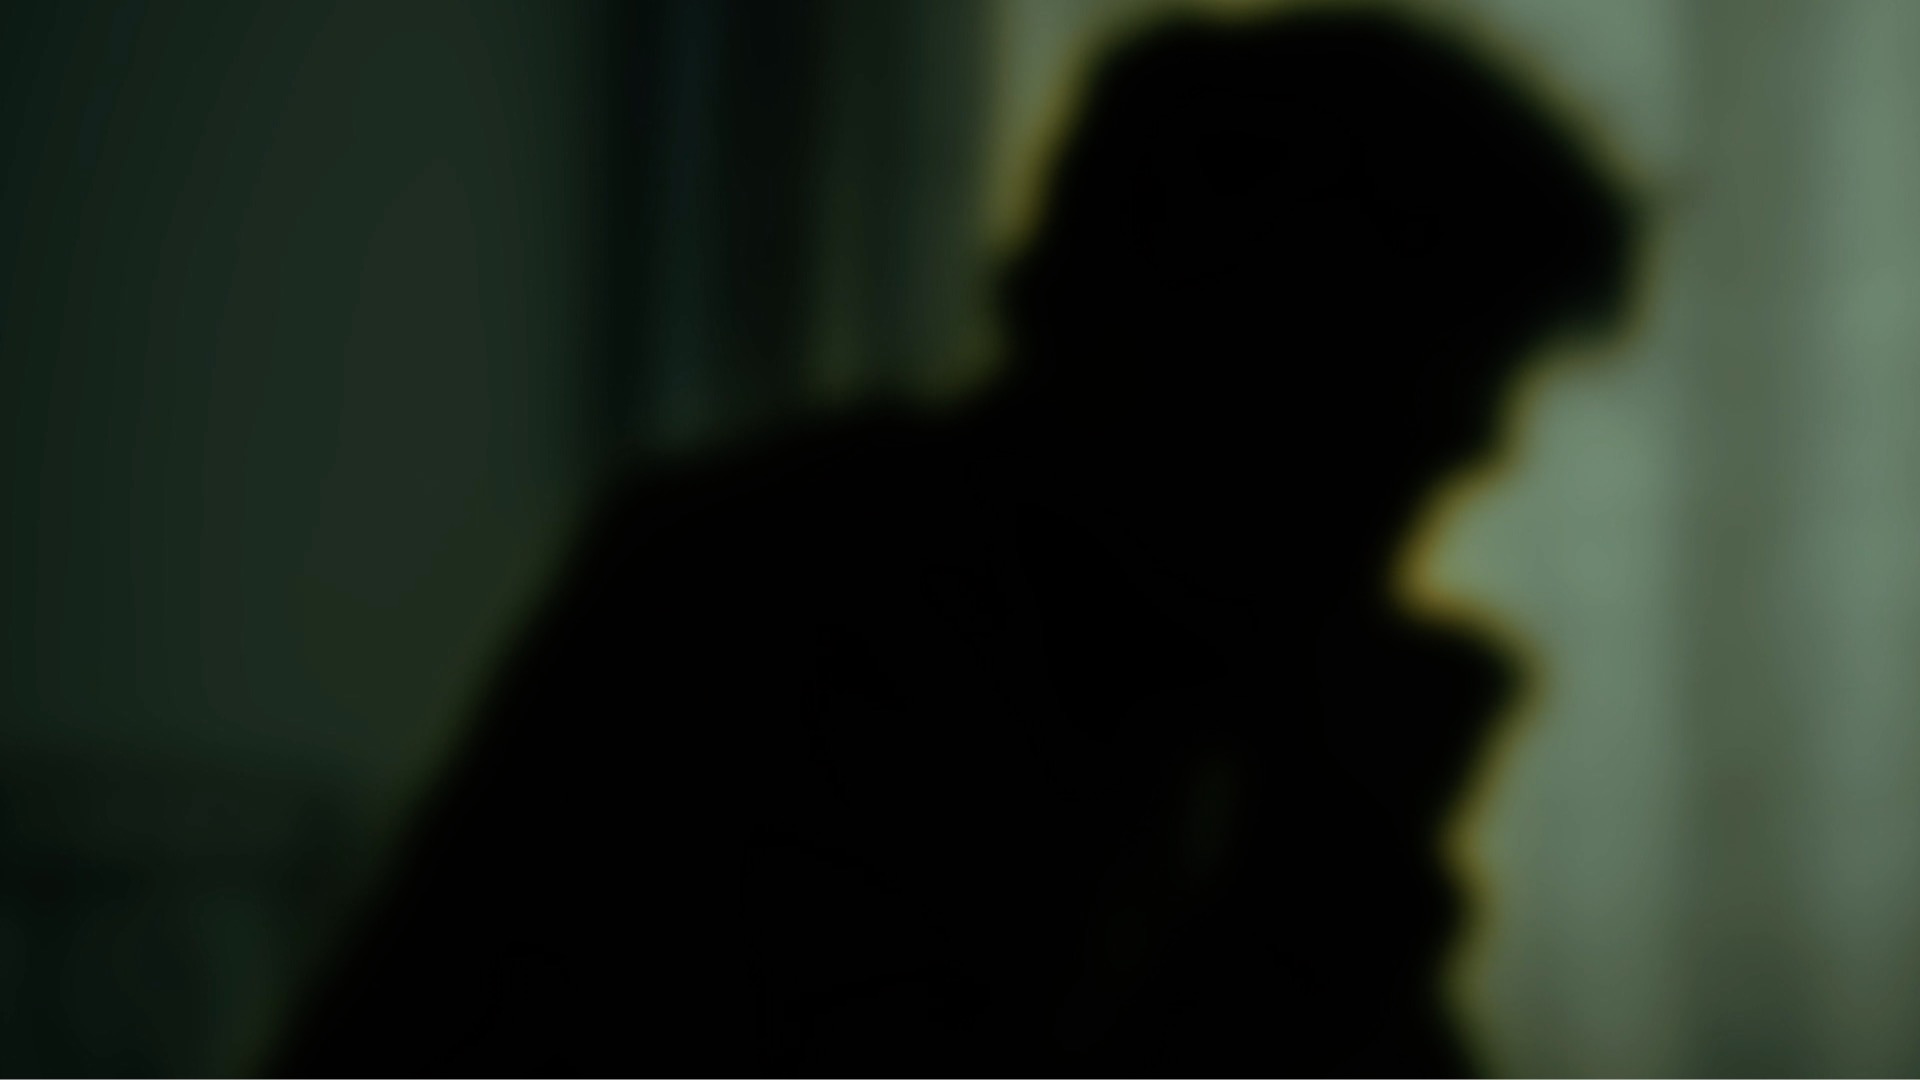 Blurry shadowy silhouette of a man